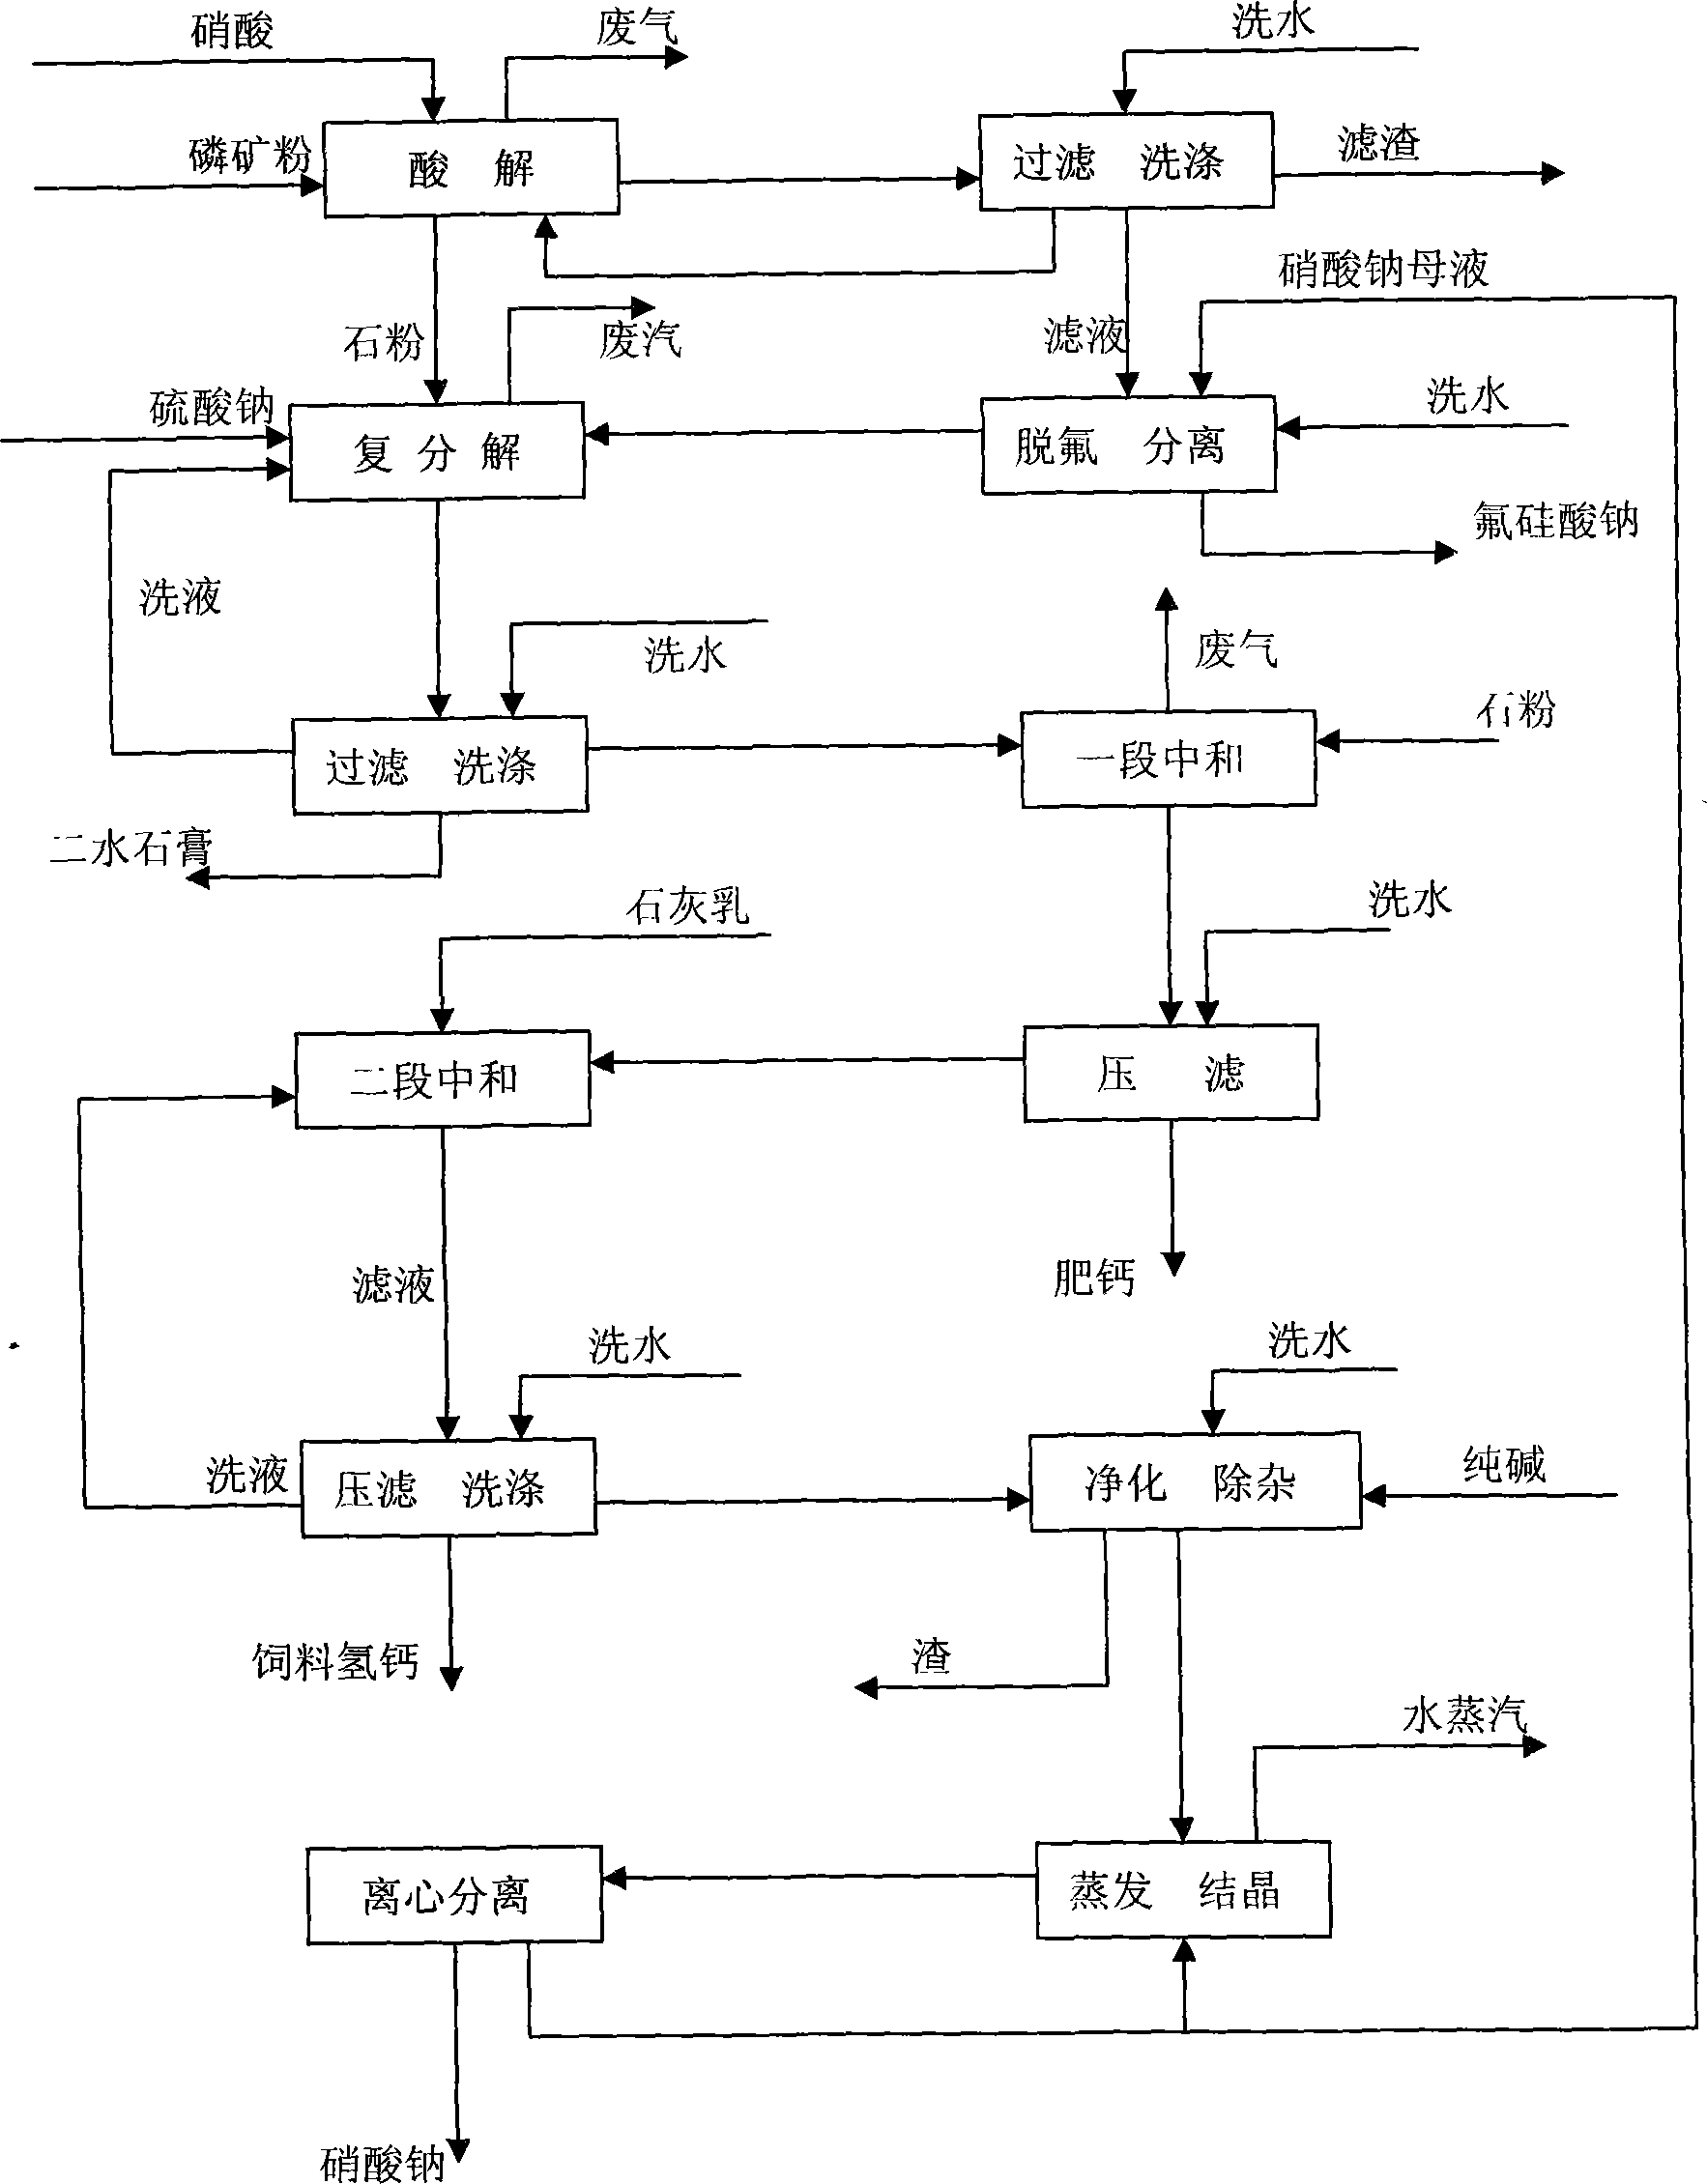 Method for producing calcium hydrophosphate and sodium nitrate by decomposing phosphorus ore with nitric acid